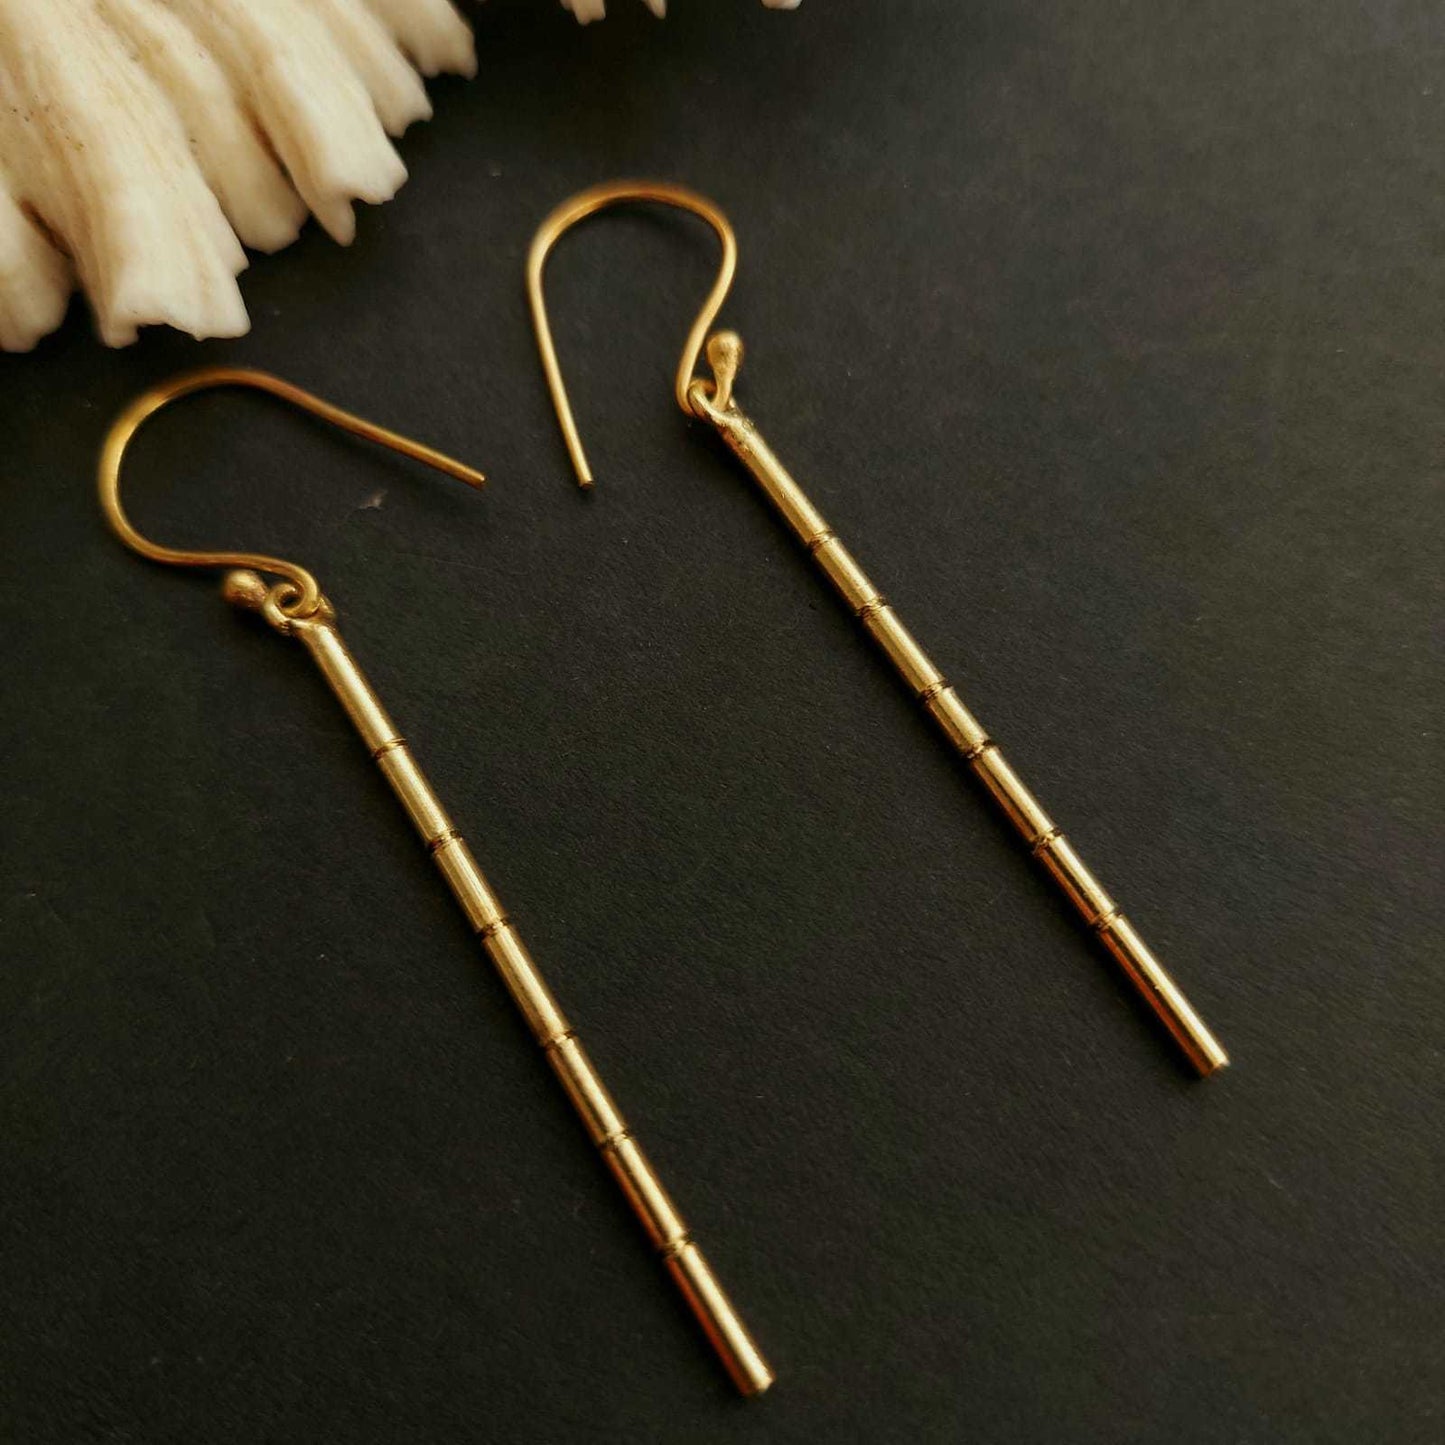 Elegant Stylish And Contemporary Stick Earrings